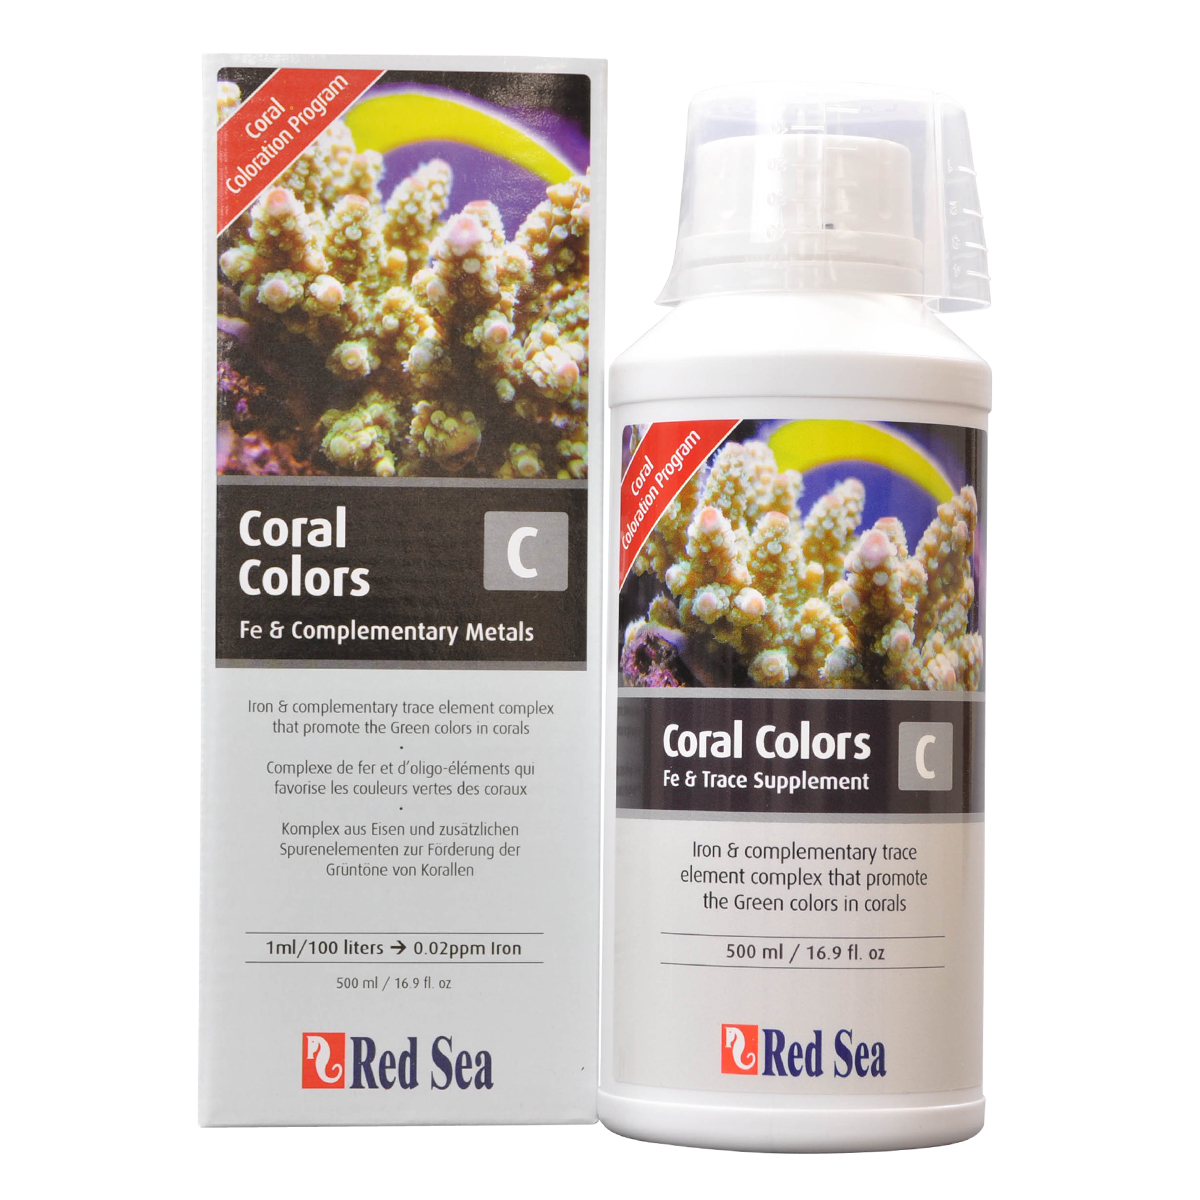 red sea coral colors pro test kit